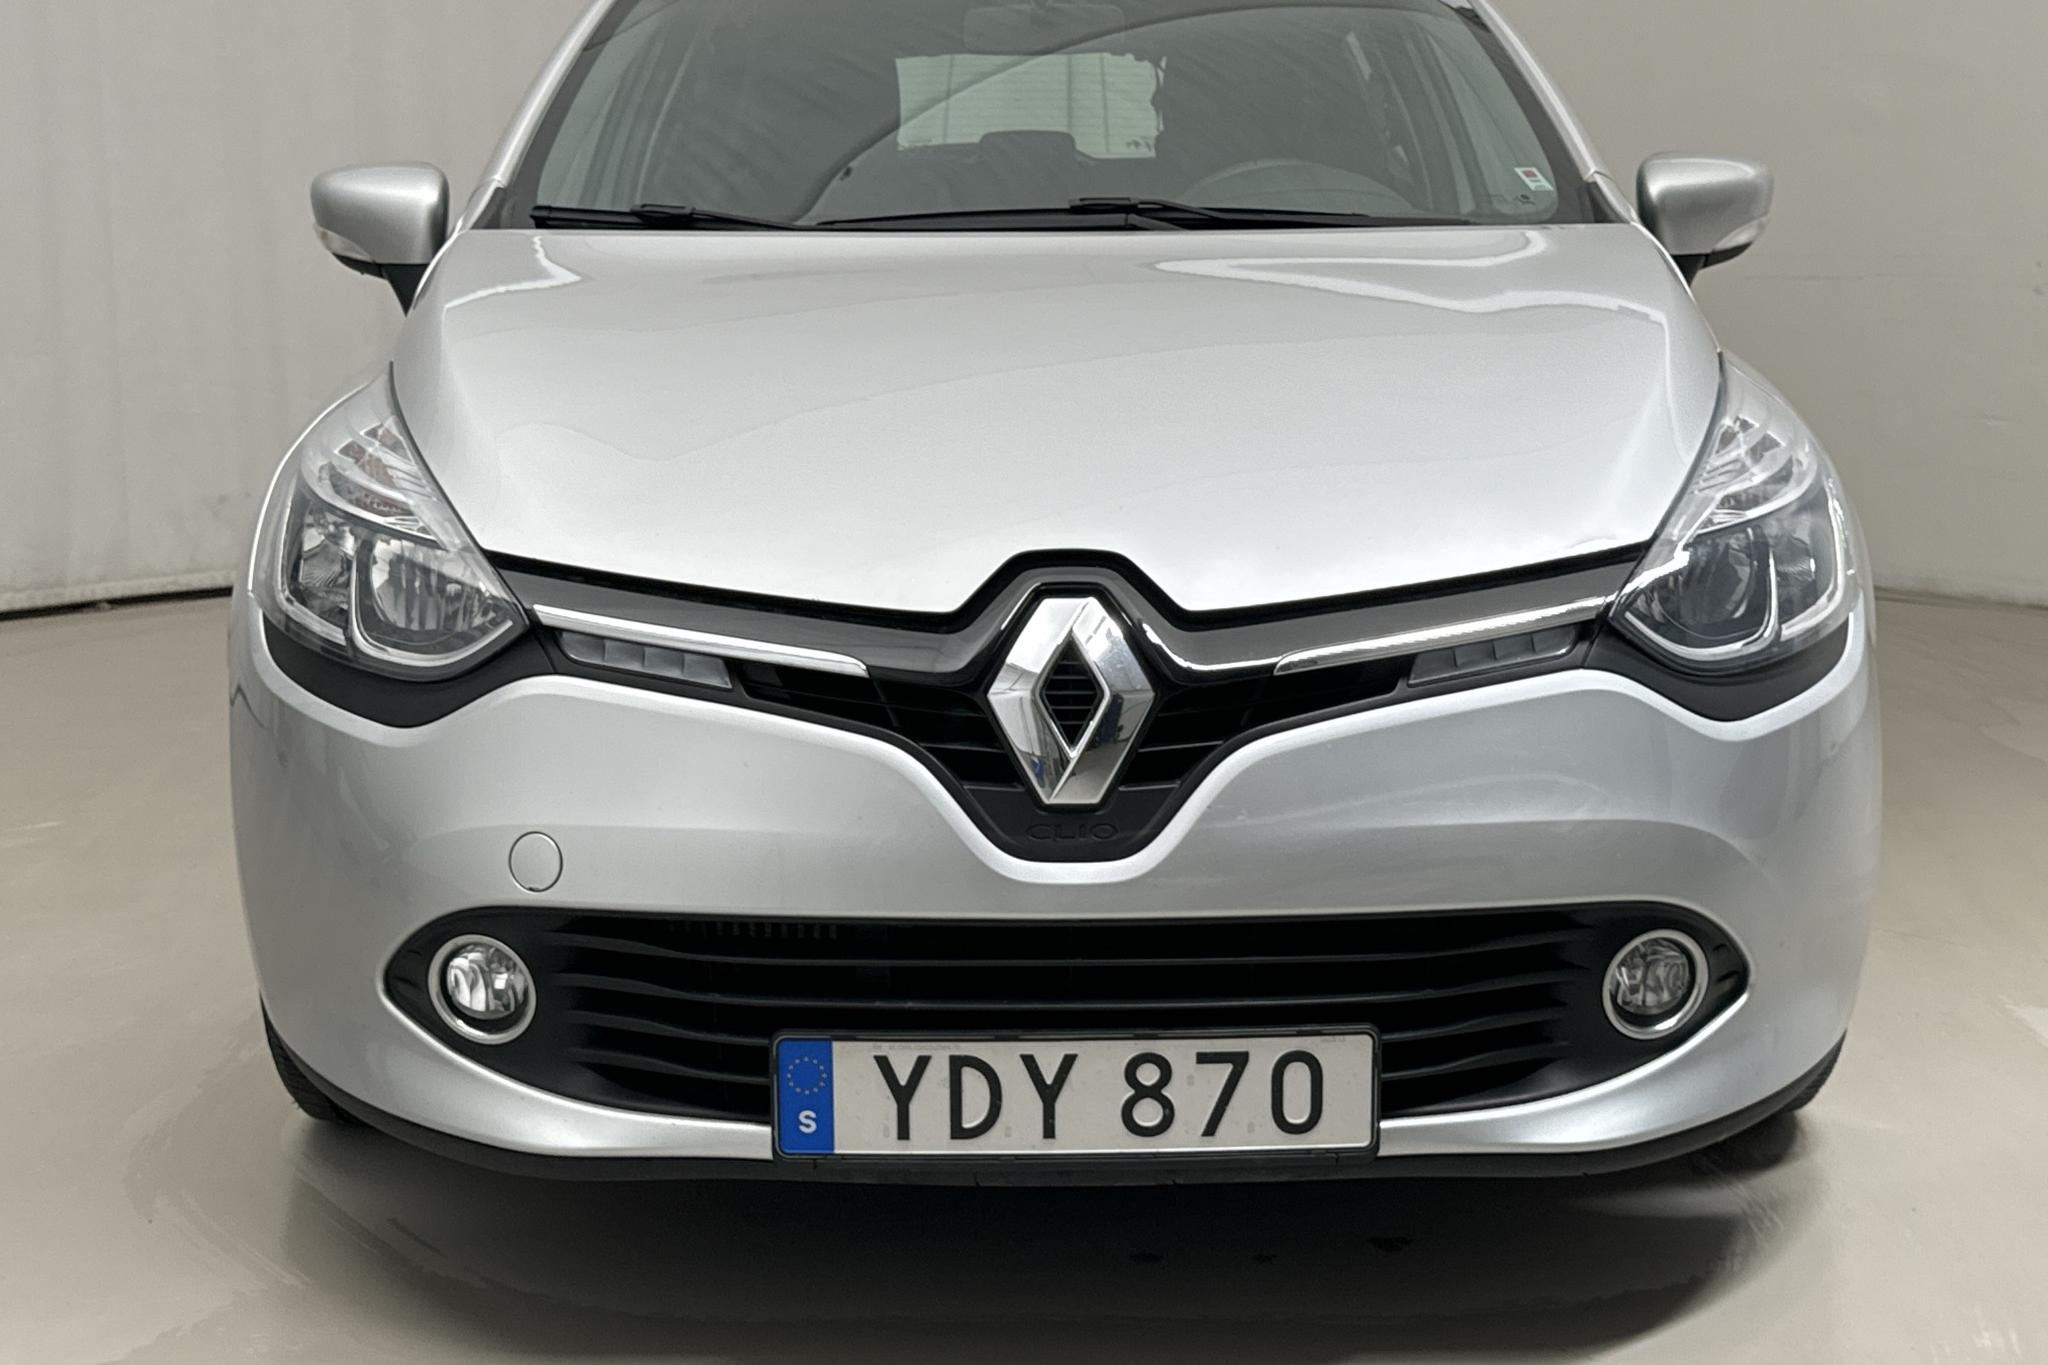 Renault Clio IV 0.9 TCe 90 5dr (90hk) - 7 121 mil - Manuell - silver - 2016